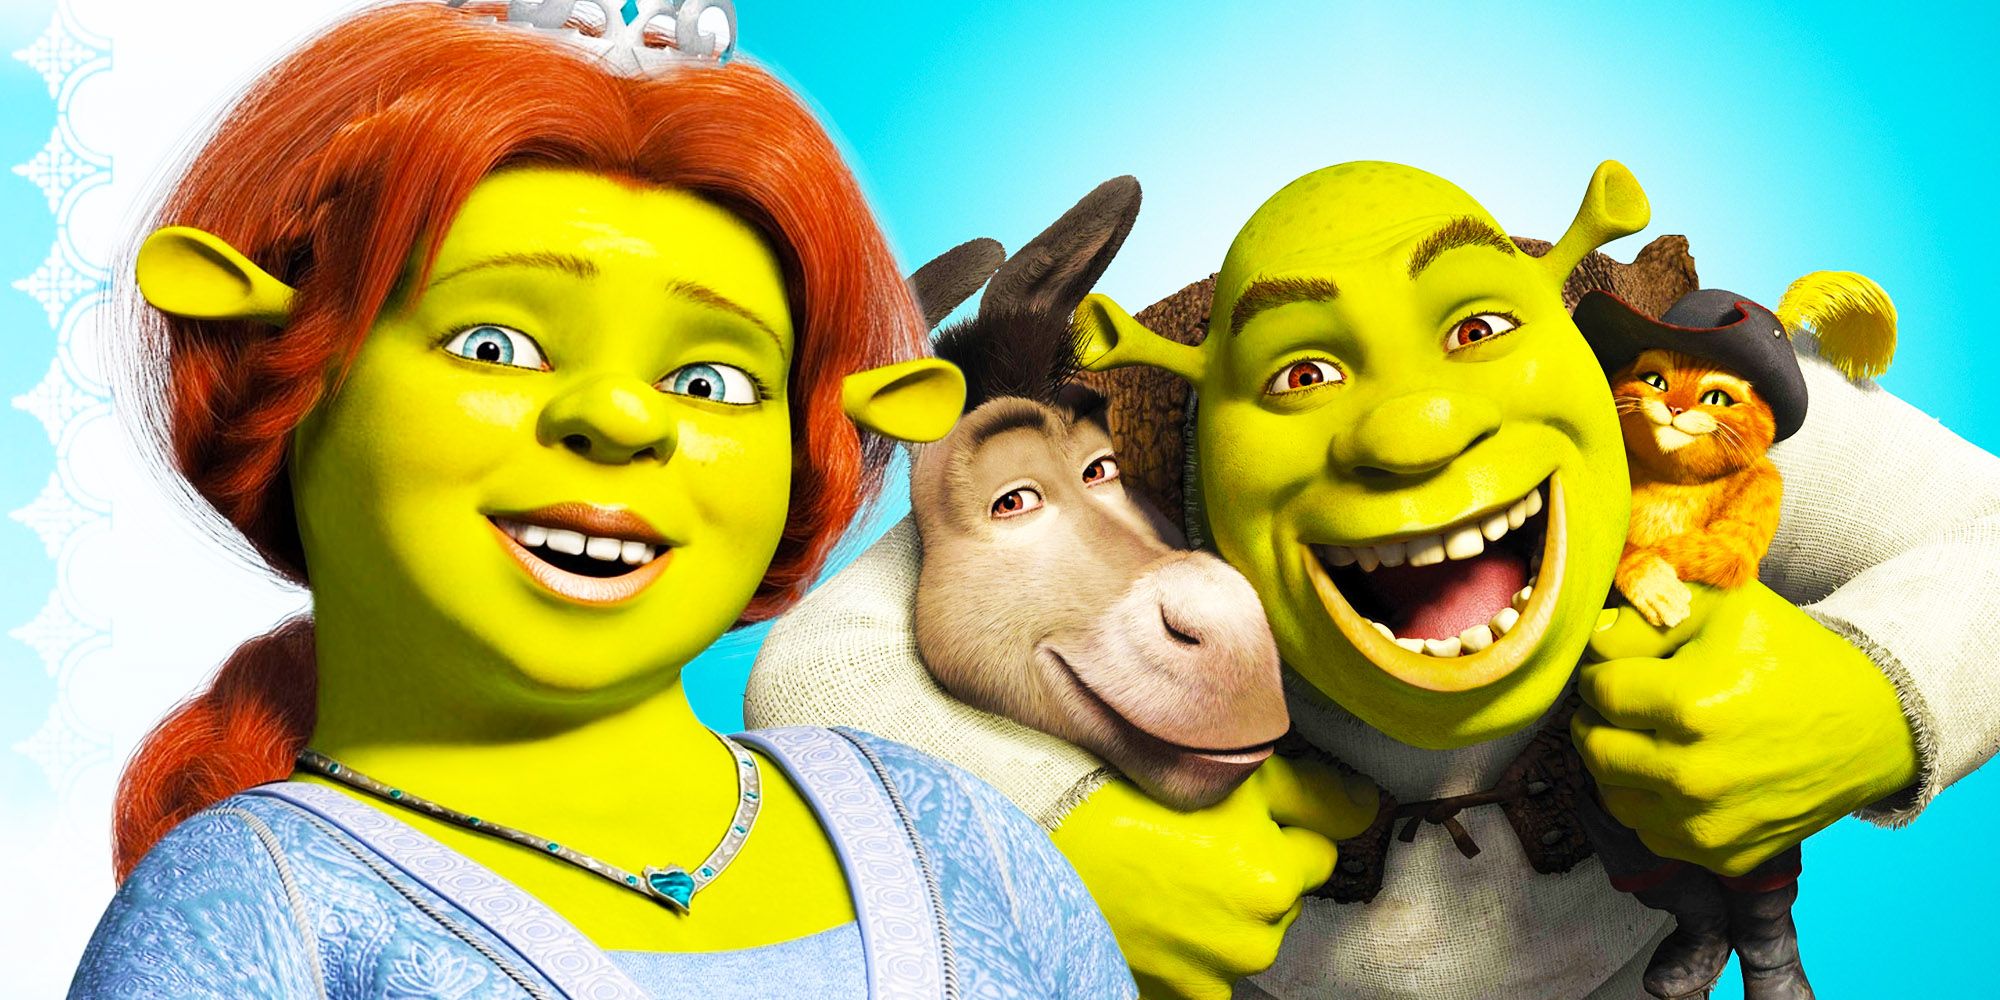 Why Does Shrek Have A Scottish Accent?